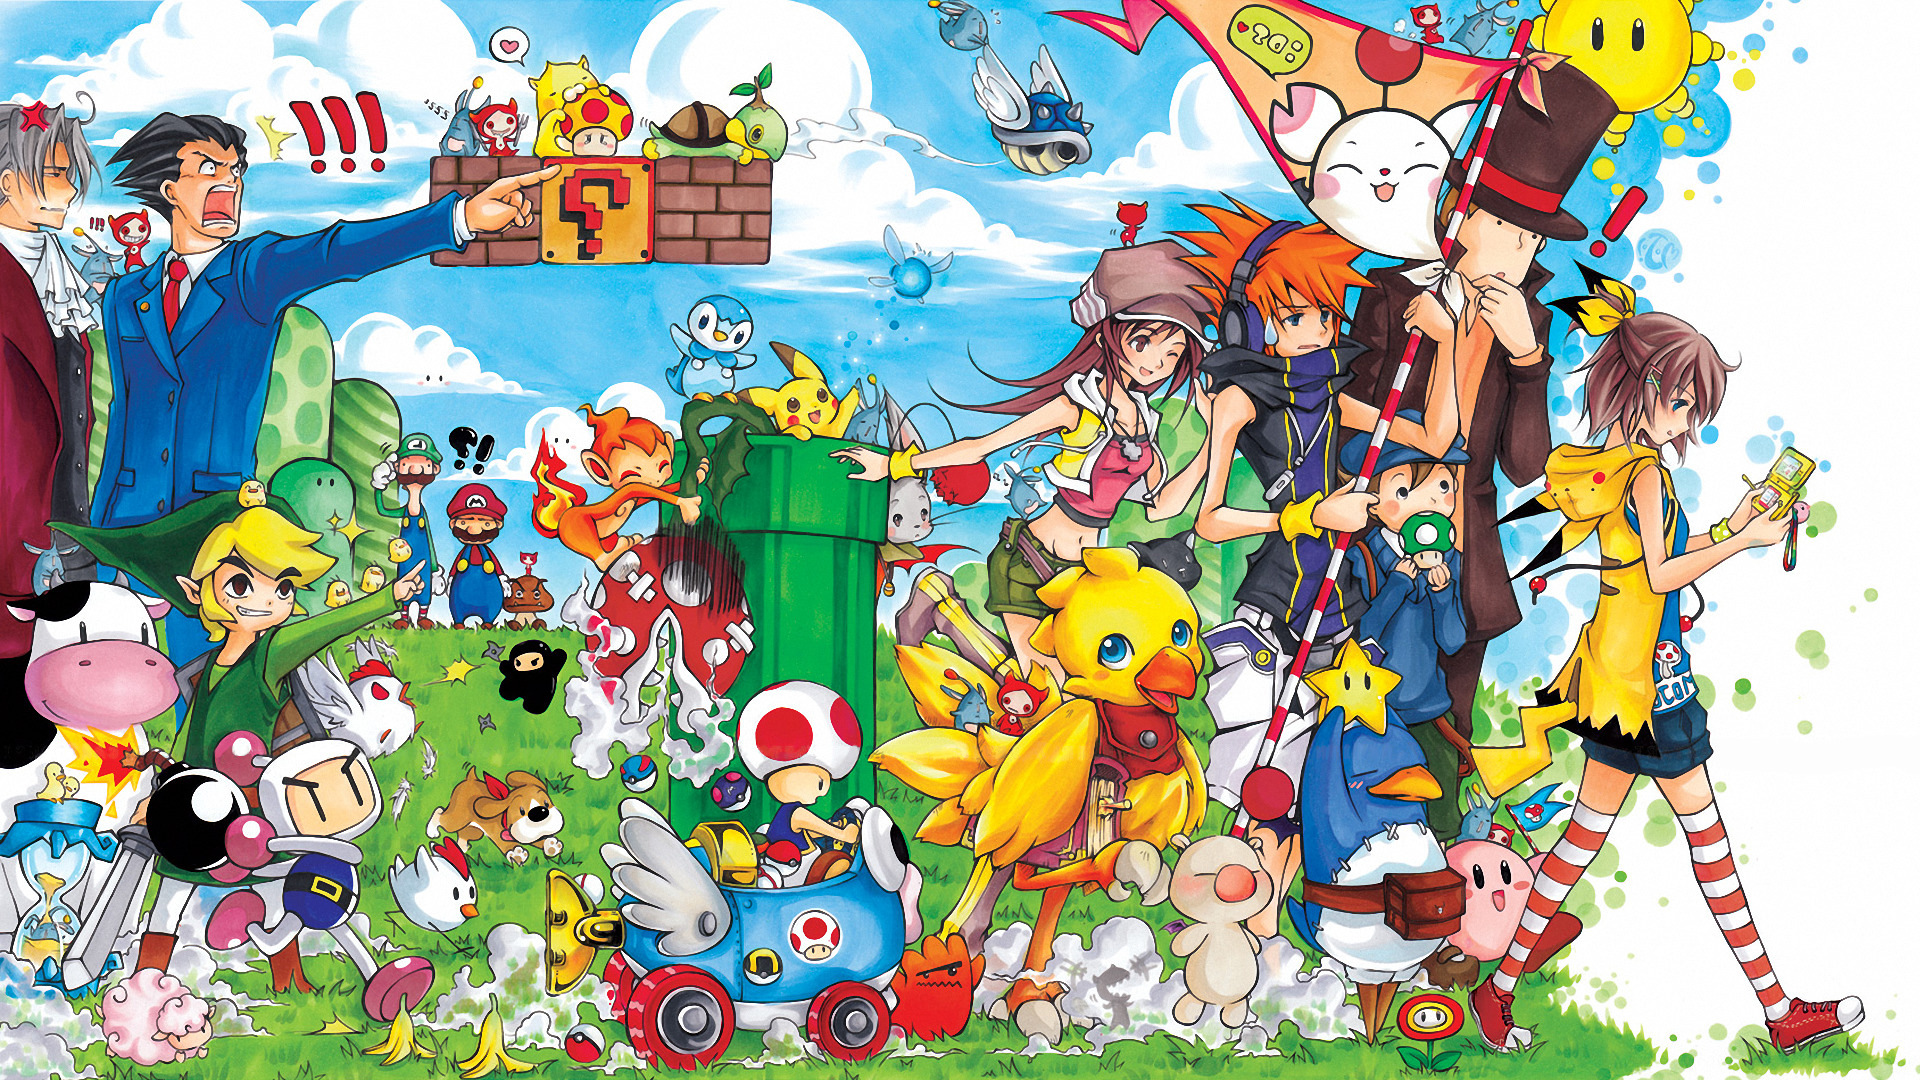 Mario Bros., The Legend Of Zelda, Video Games, Nintendo DS, The World Ends With You, Link, Bomberman, Mario Kart, Ace Attorney, Disgaea, Final Fantasy, Harvest Moon Wallpaper